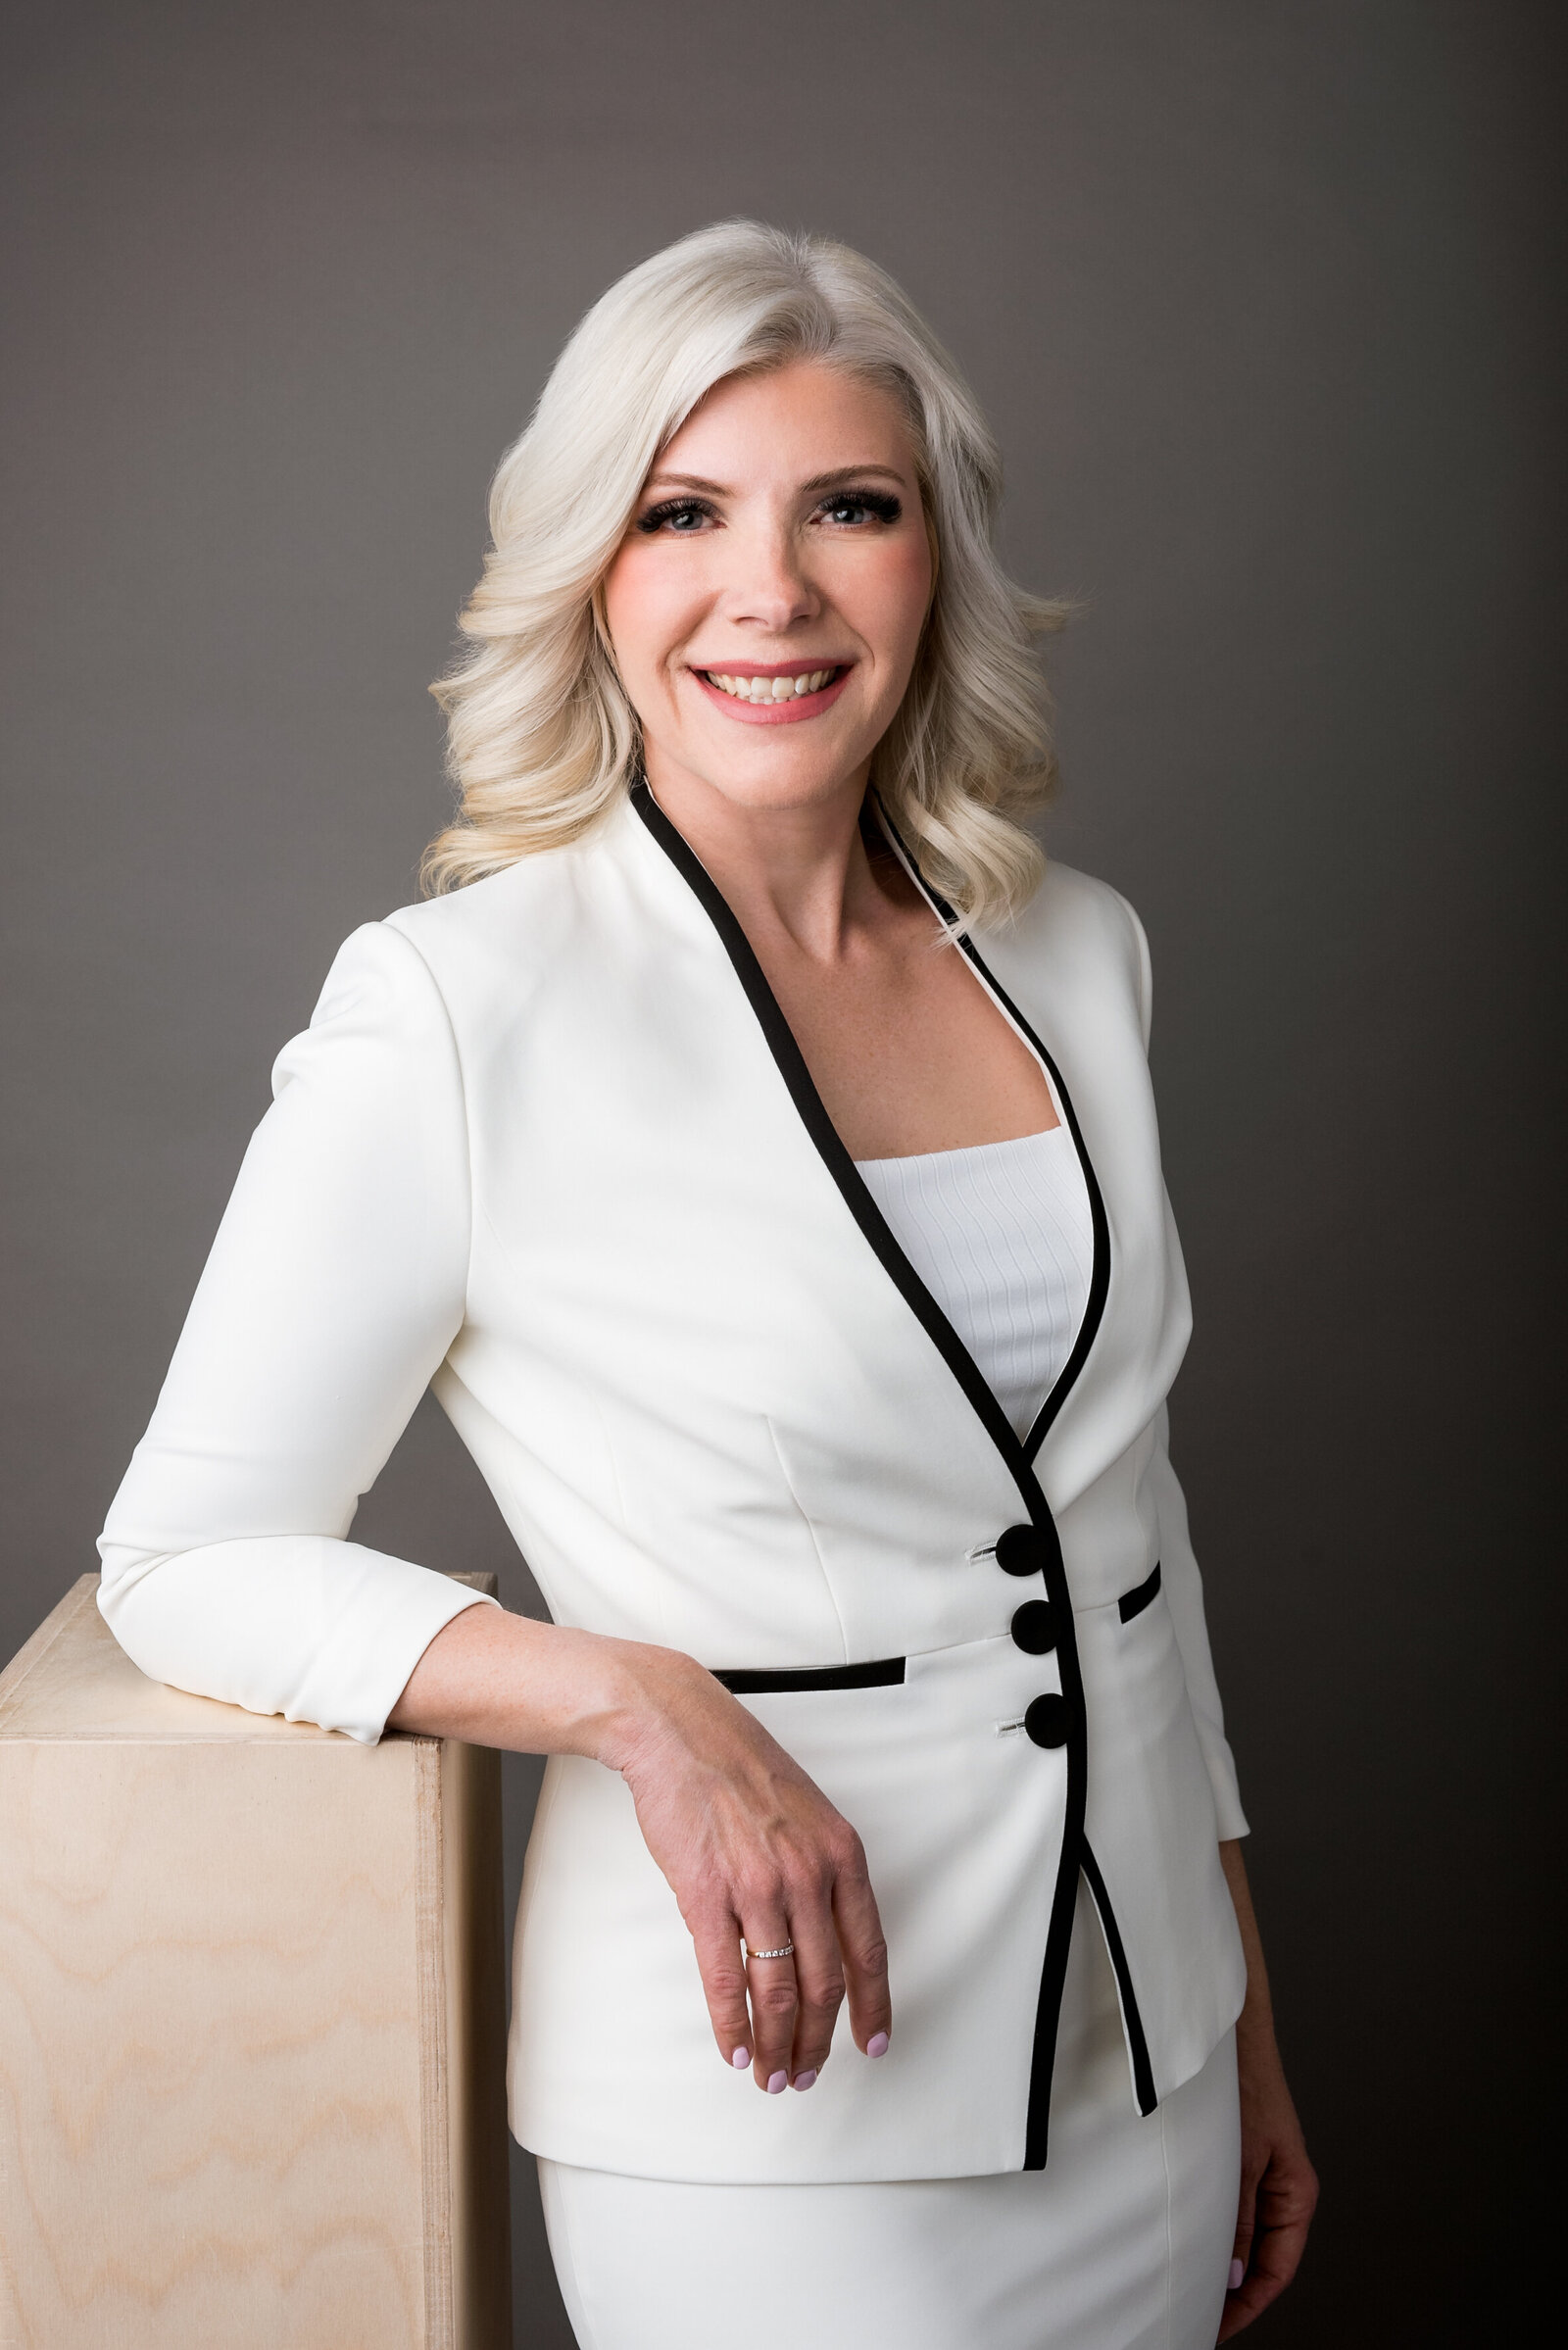 Headshot of an executive woman wearing designer white suit jacket with black piping and buttons